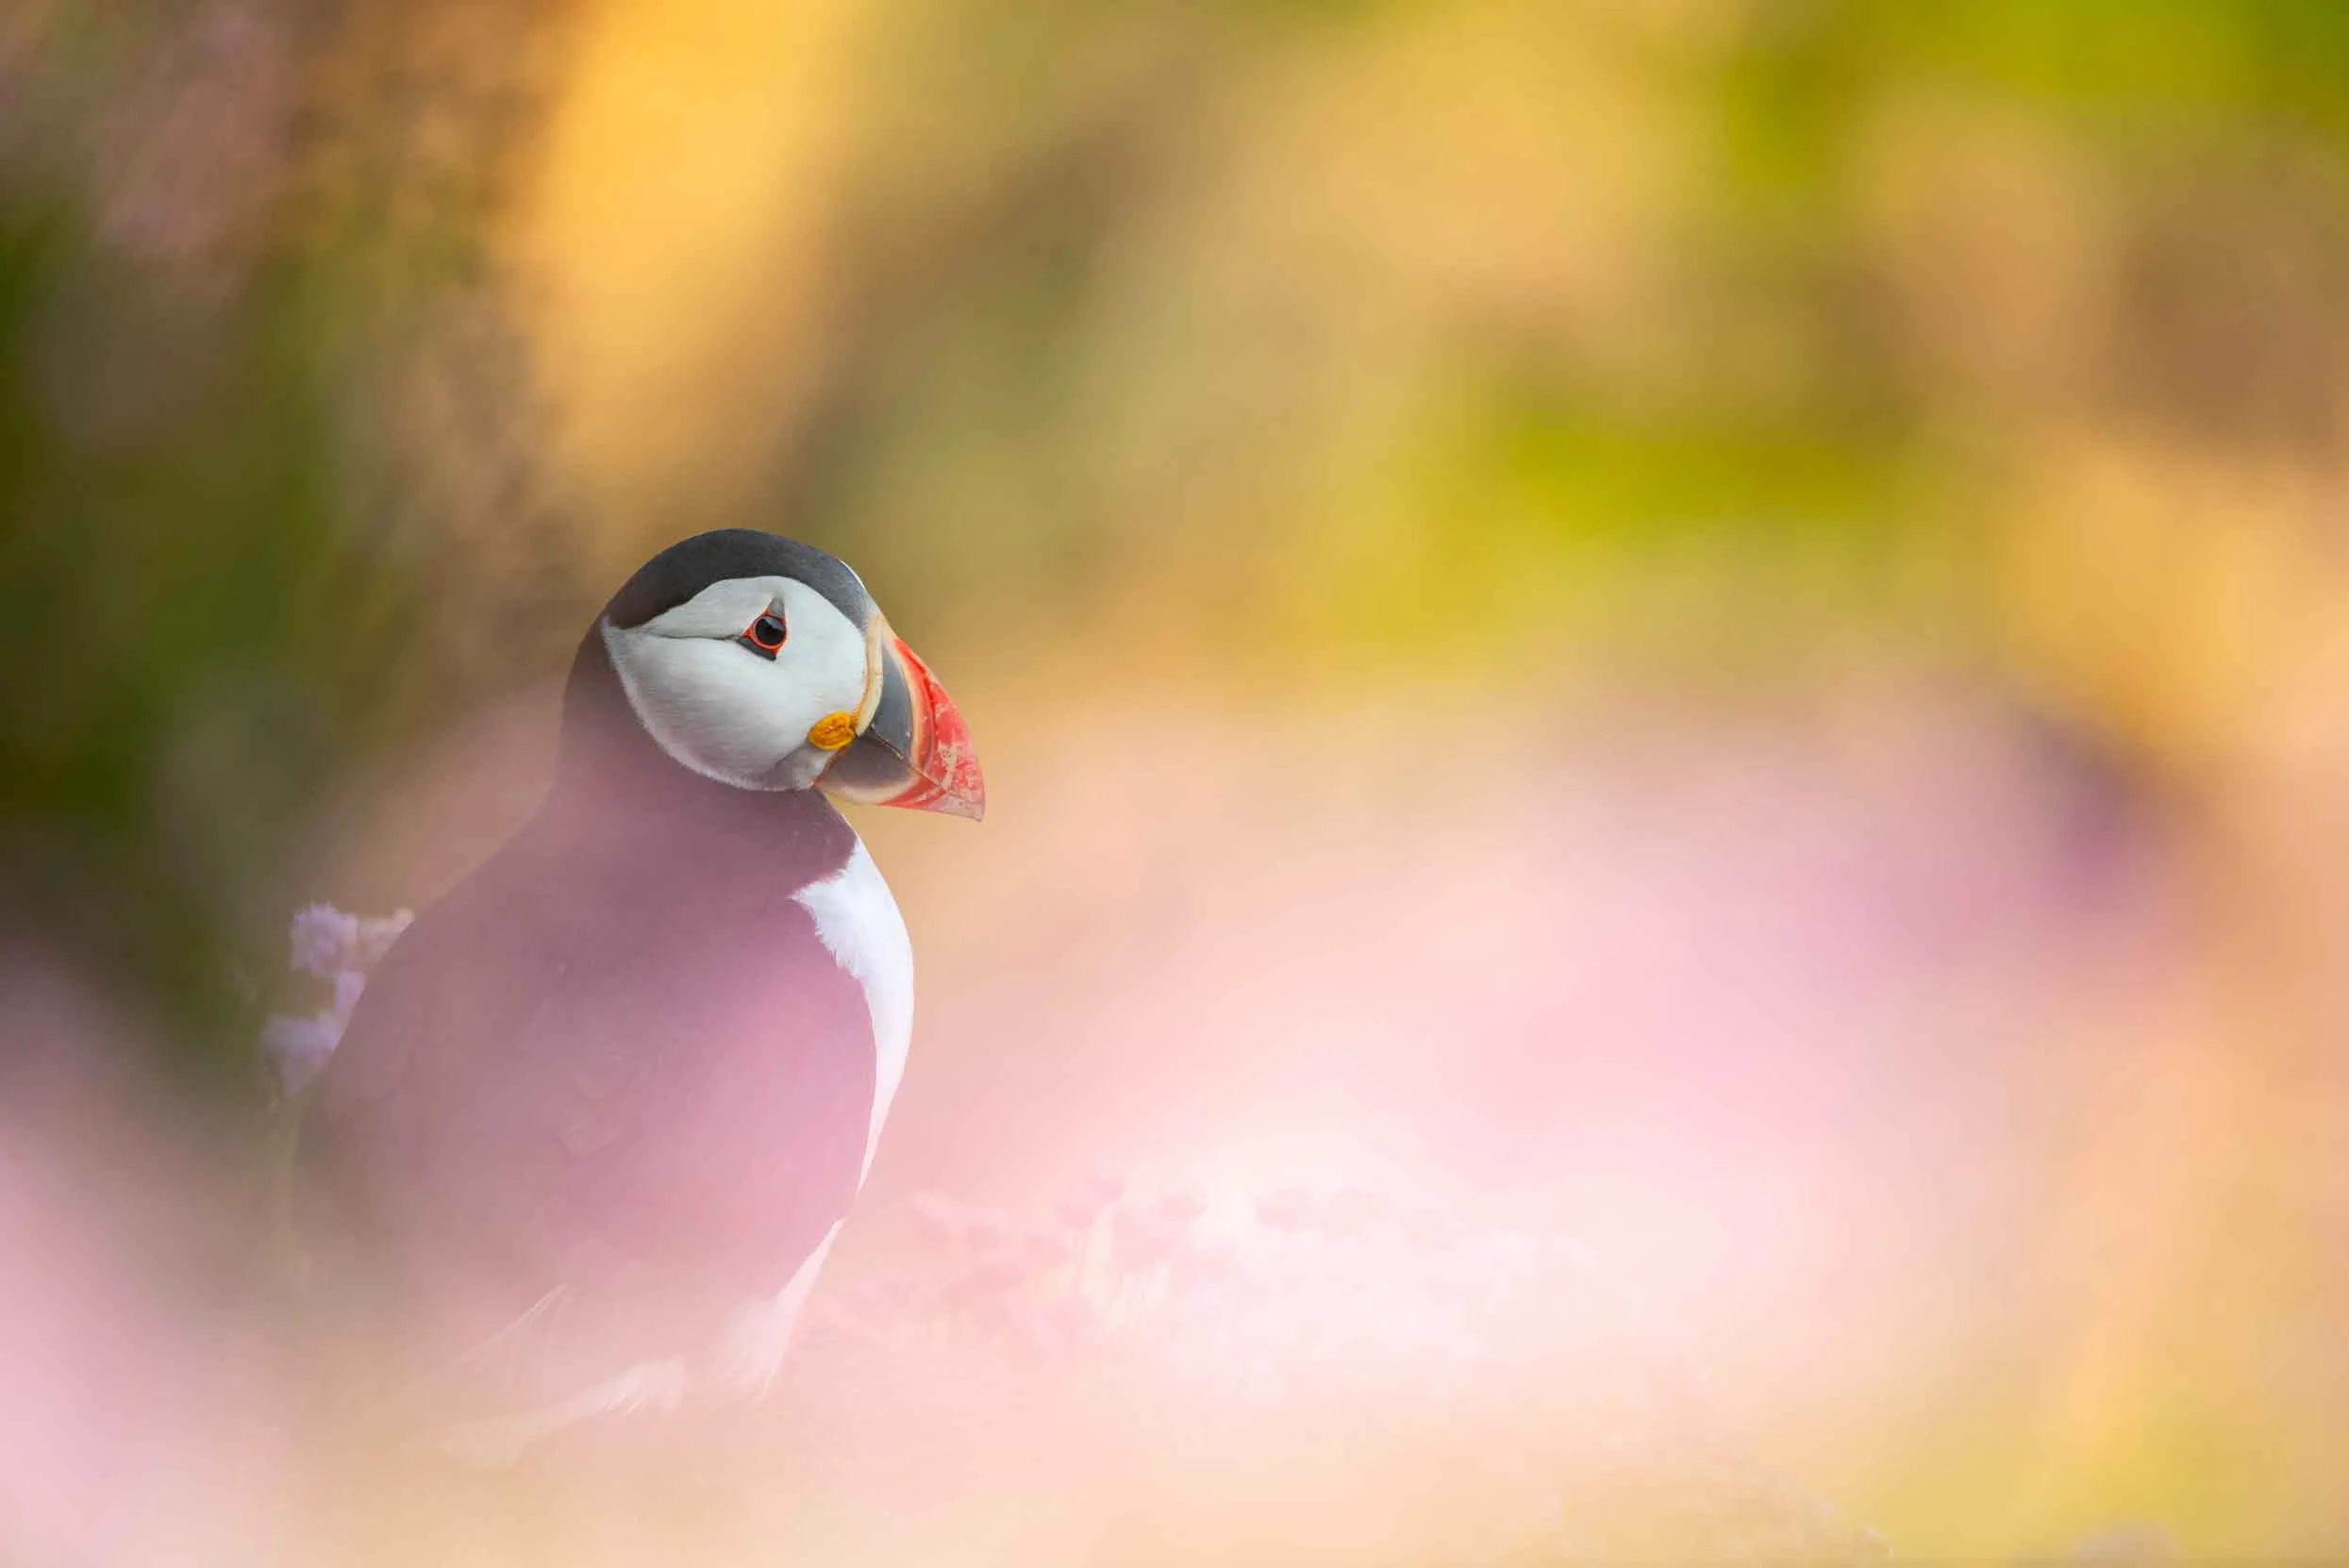 A lone Puffin sat on a cliff edge surrounded by small pink flowers.